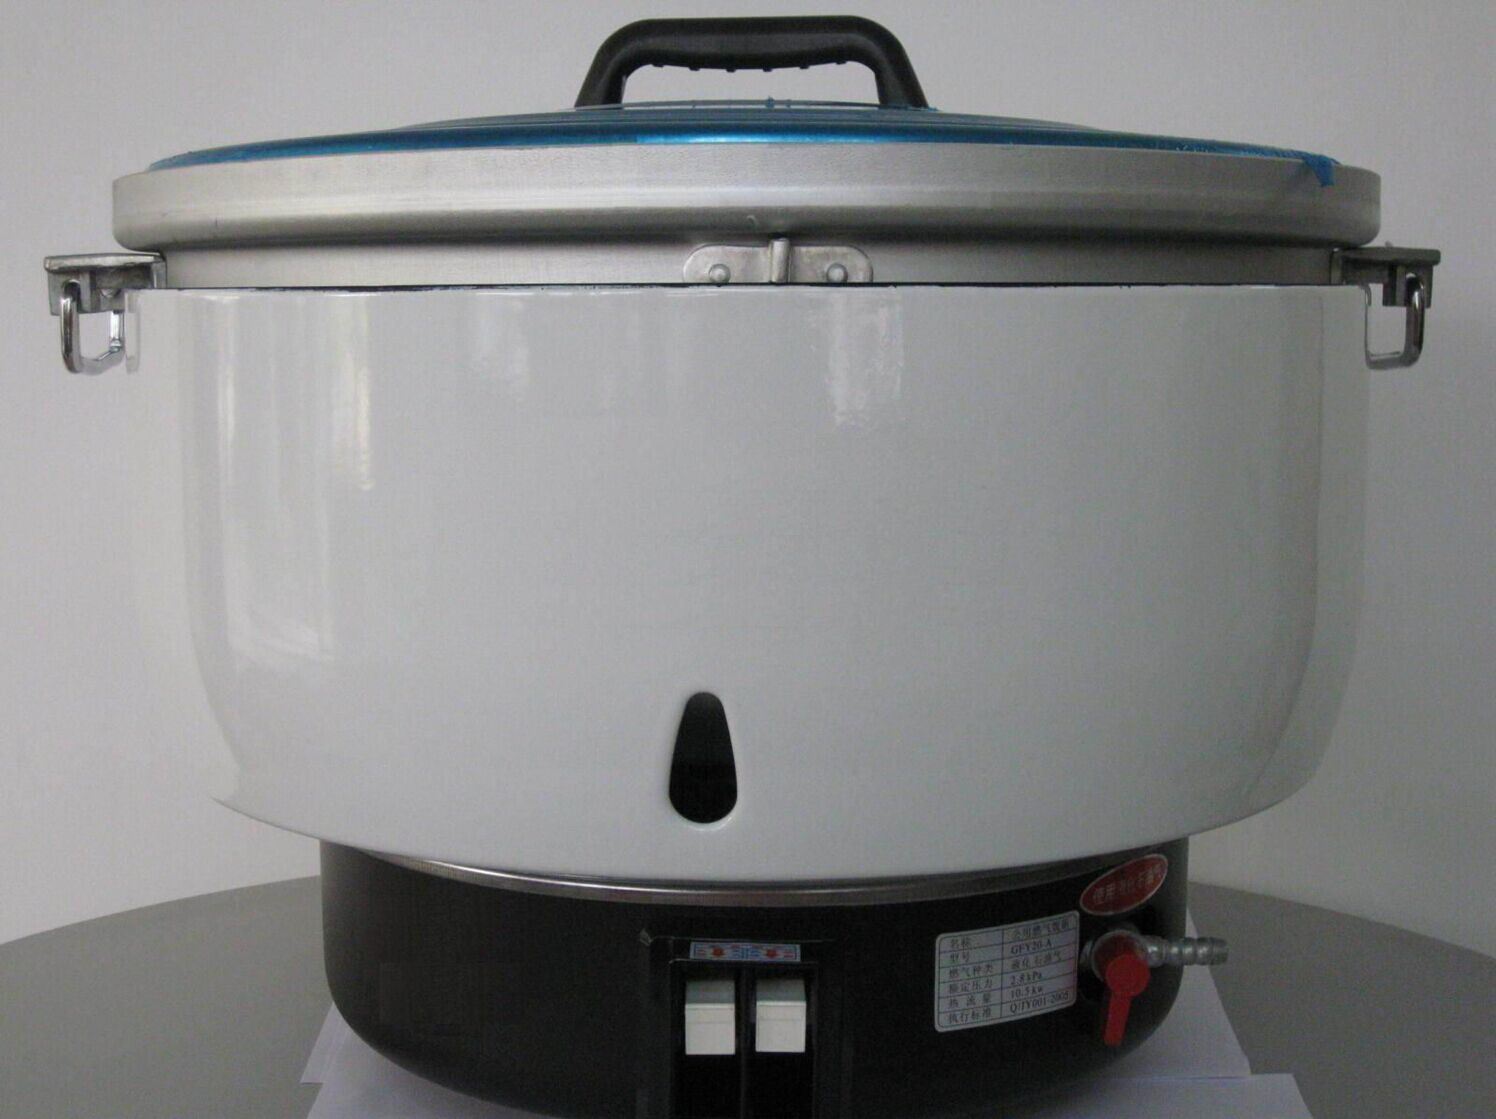 25L Commercial Gas Rice Cooker LPG Cooker